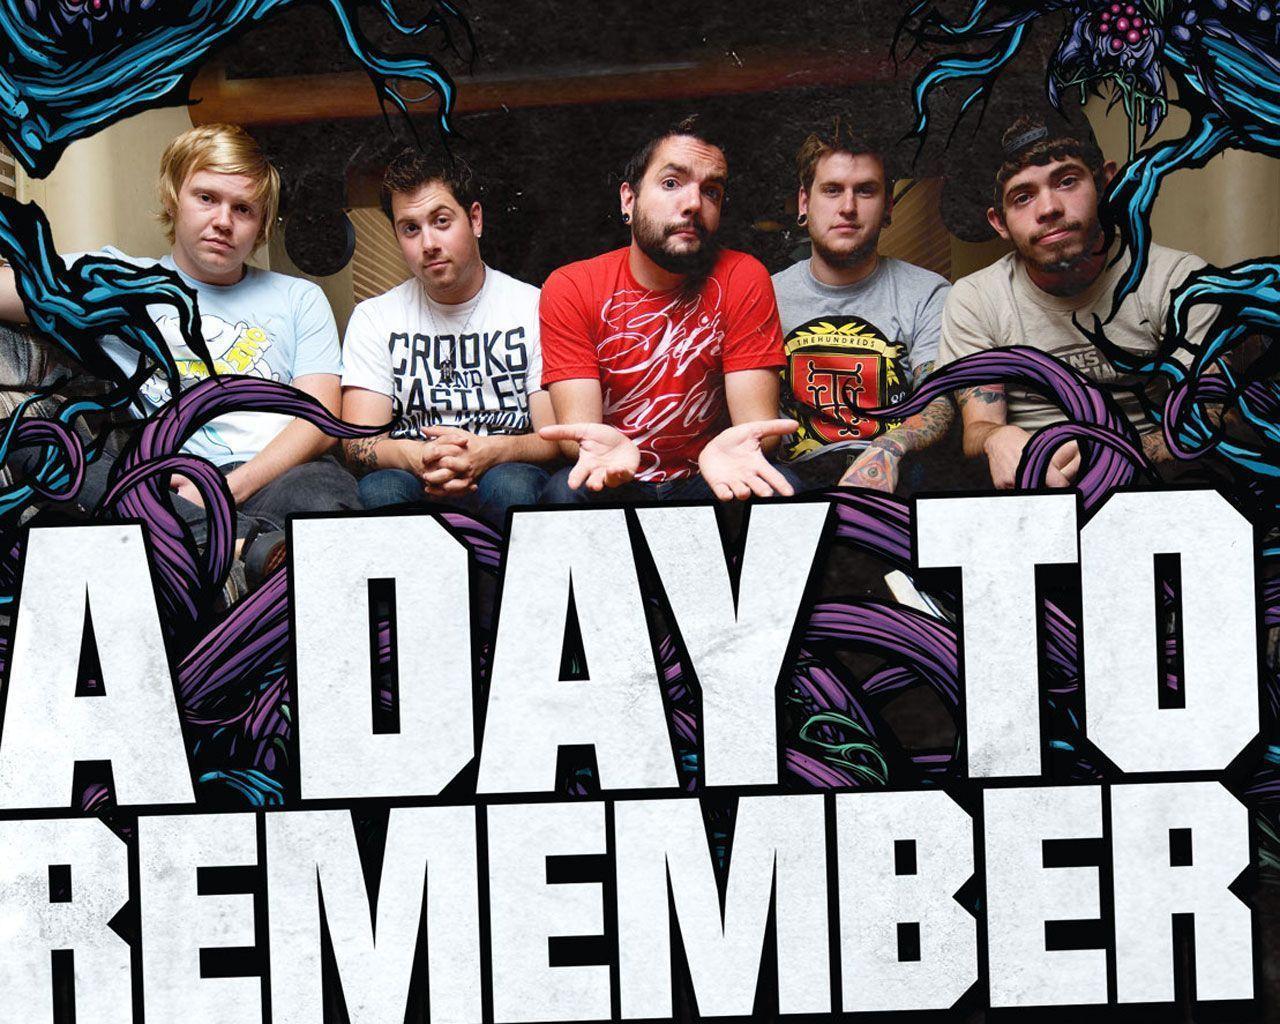 A Day To Remember Wallpaper, A Day To Remember Band Wallpaper